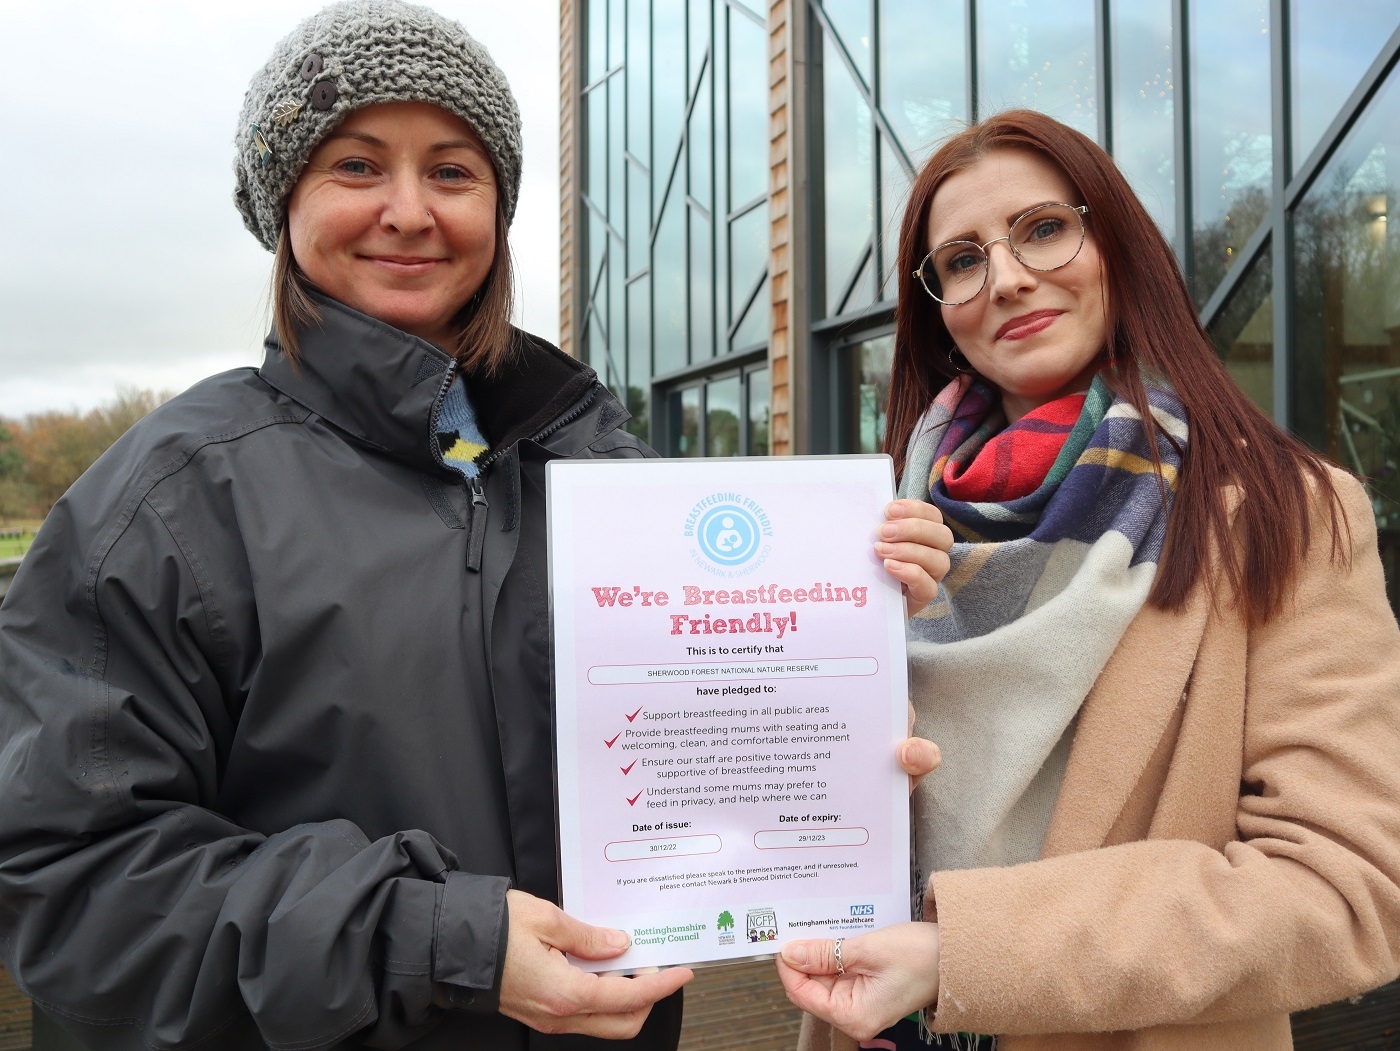 Breastfeeding friendly certificate being presented to Senior Site Manager Gemma Howarth by Early Years practitioner Sami Farrand at the Sherwood Forest Visitor Centre